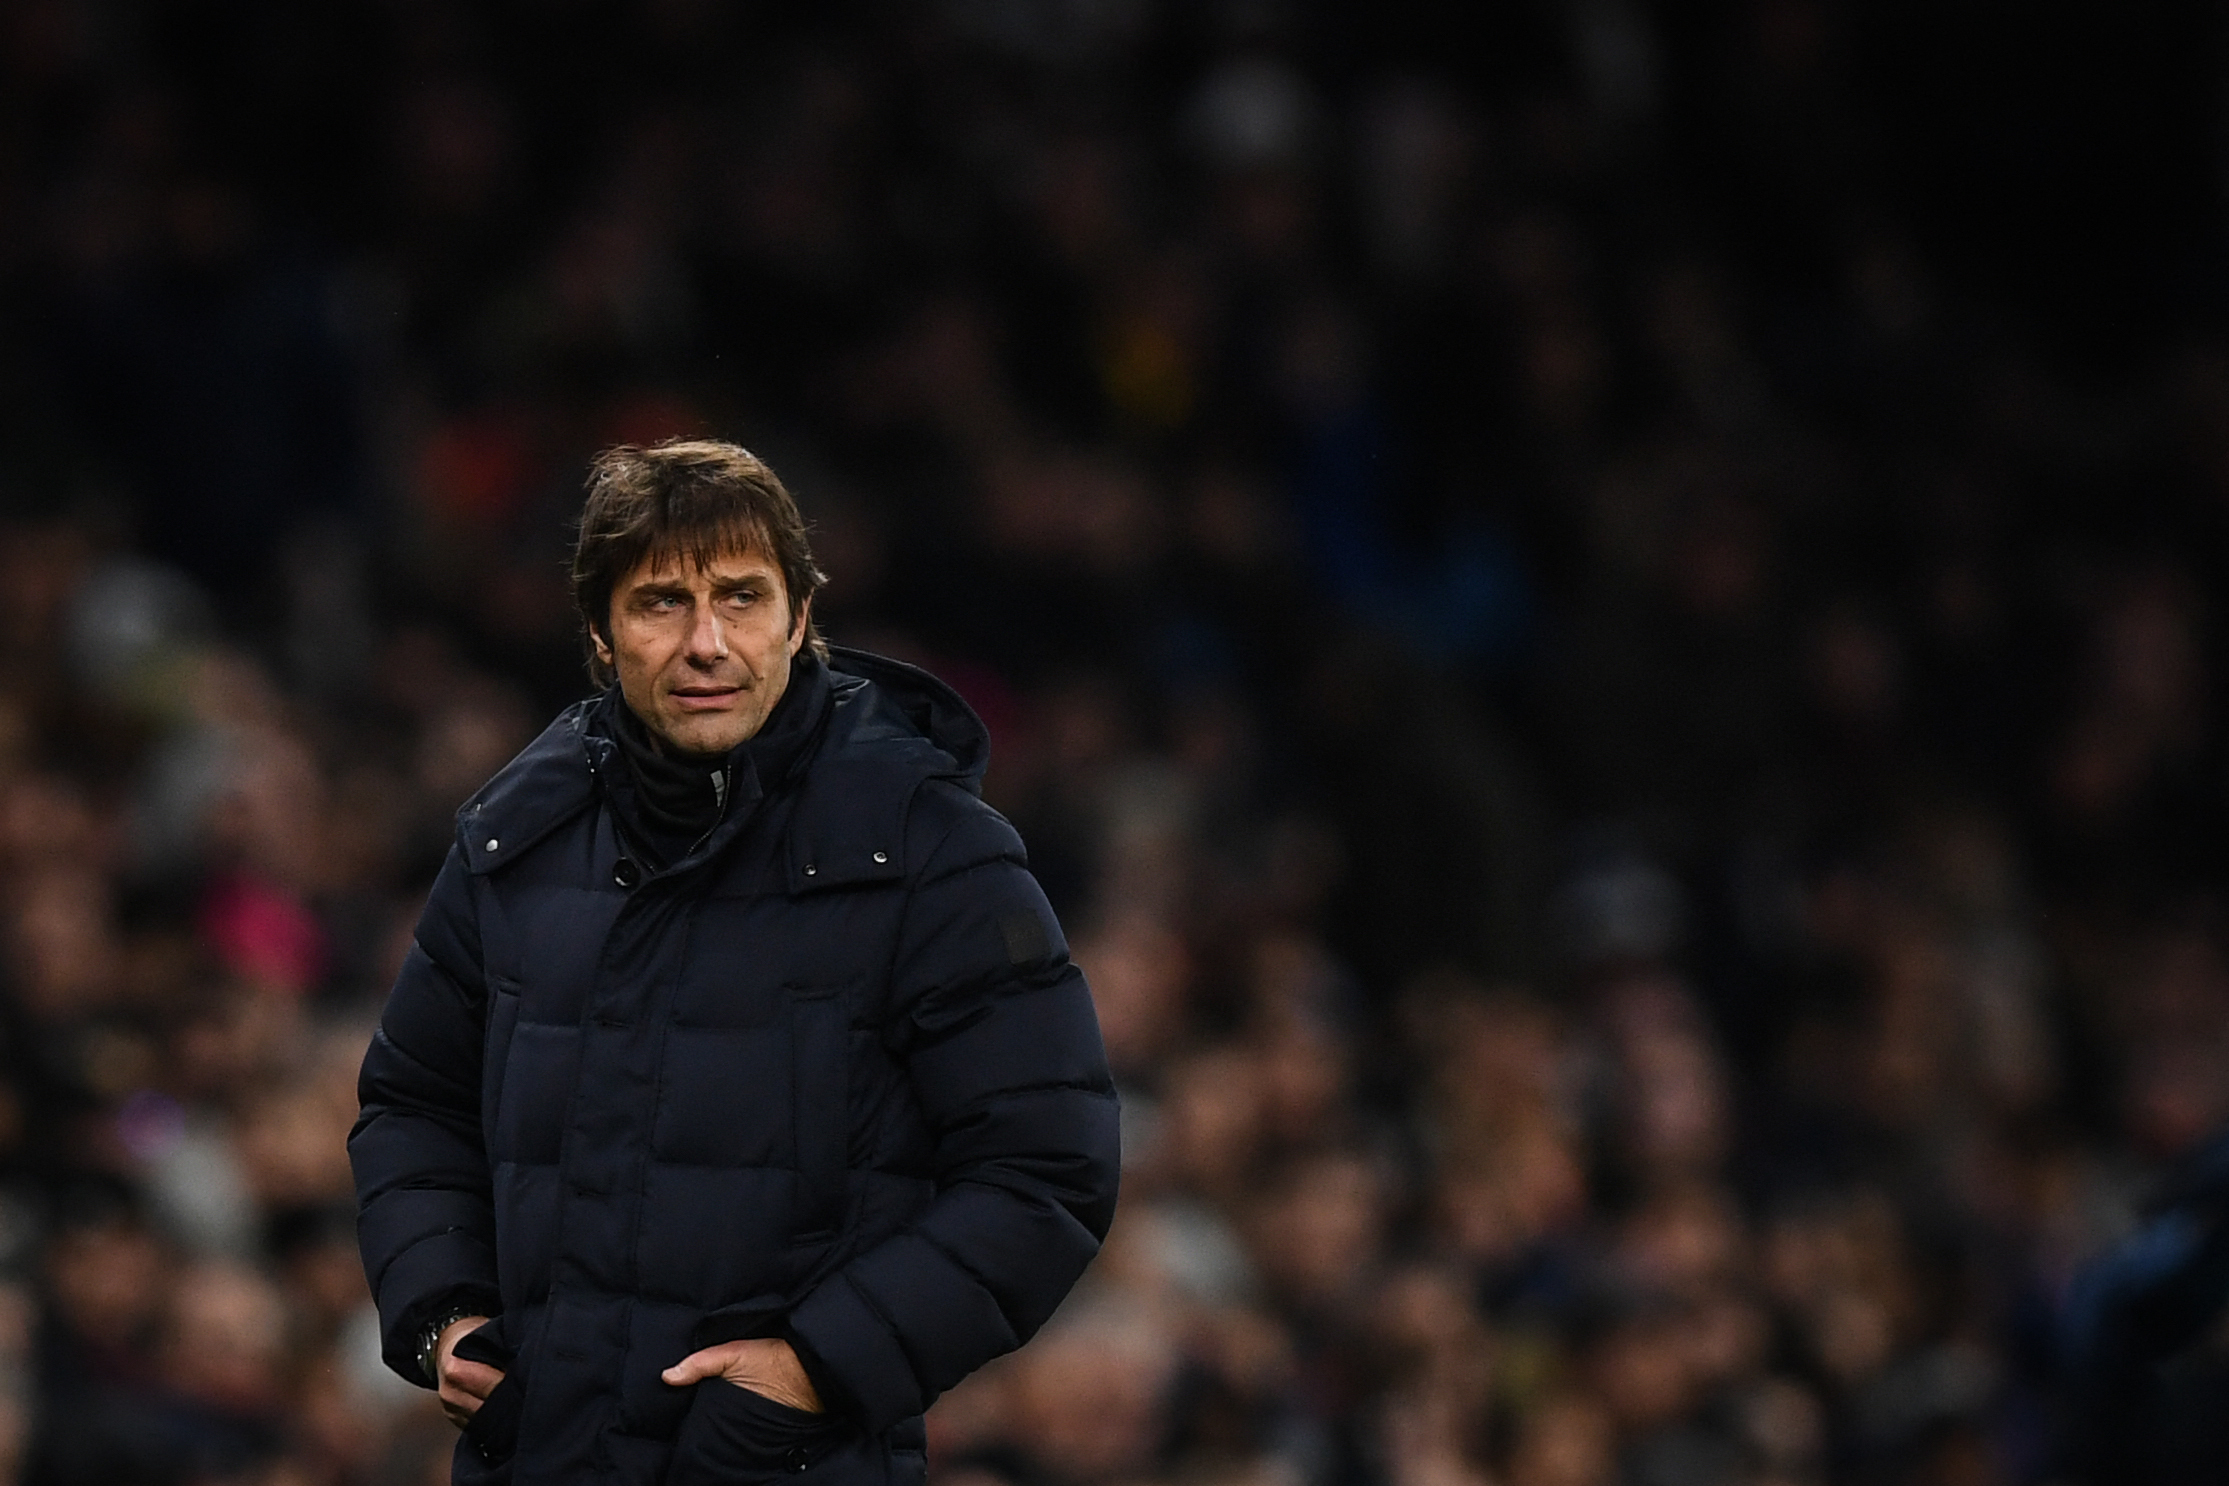 Antonio Conte admits he expected to walk into a ‘much better’ situation at Tottenham Hotspur.